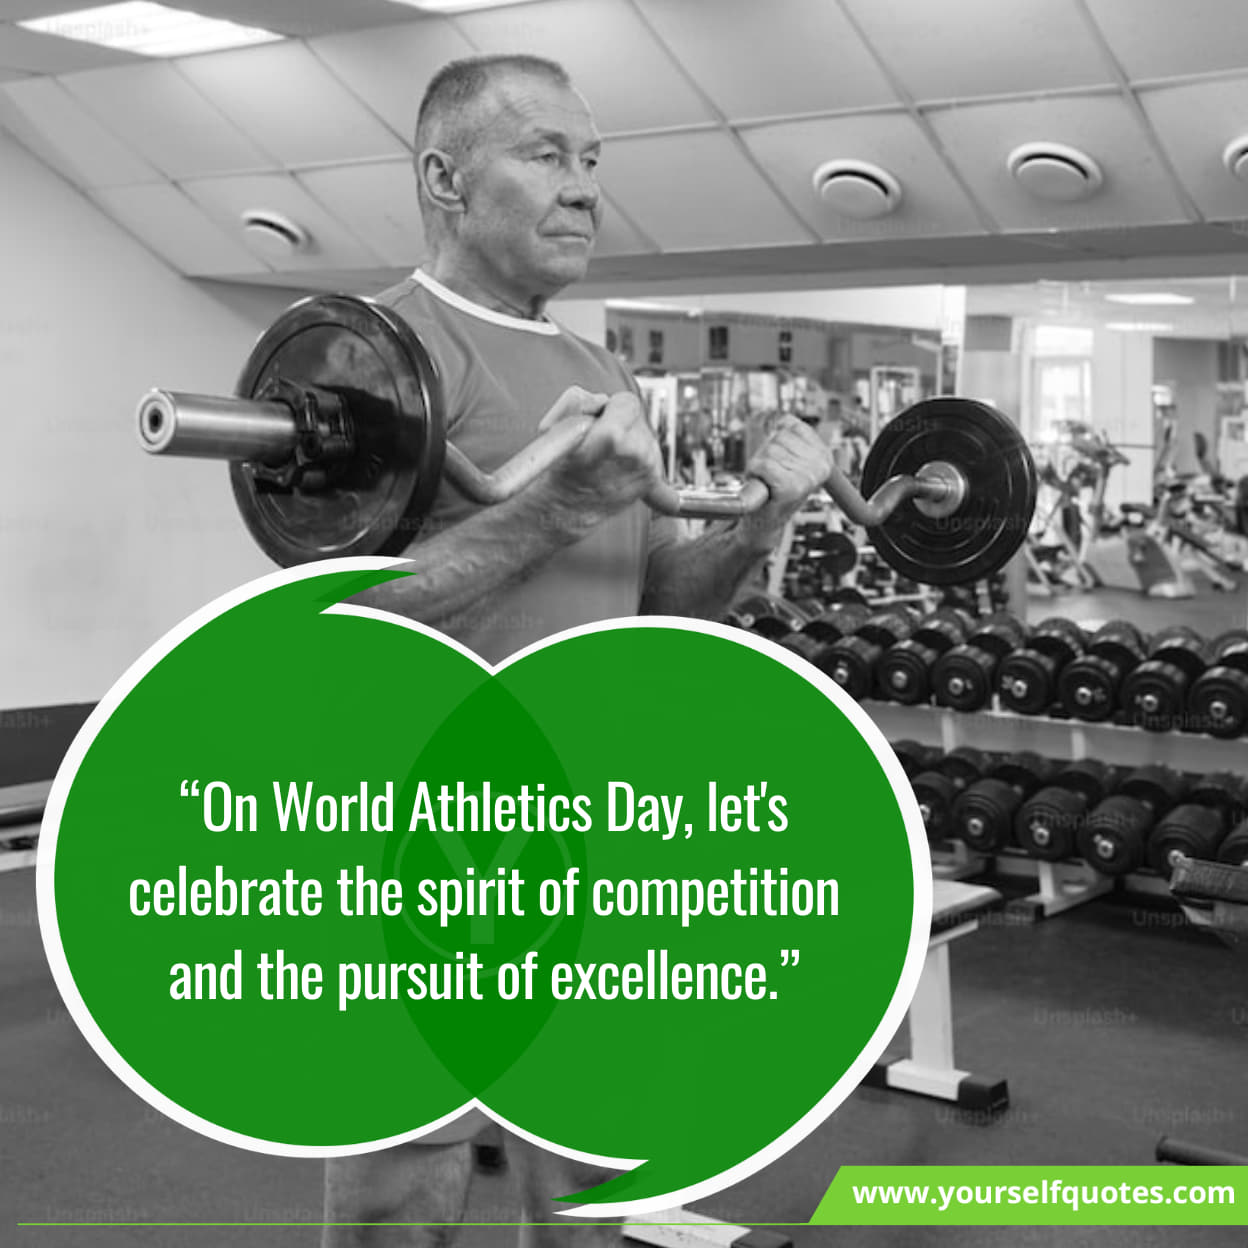 Quotes on the importance of physical fitness and athleticism